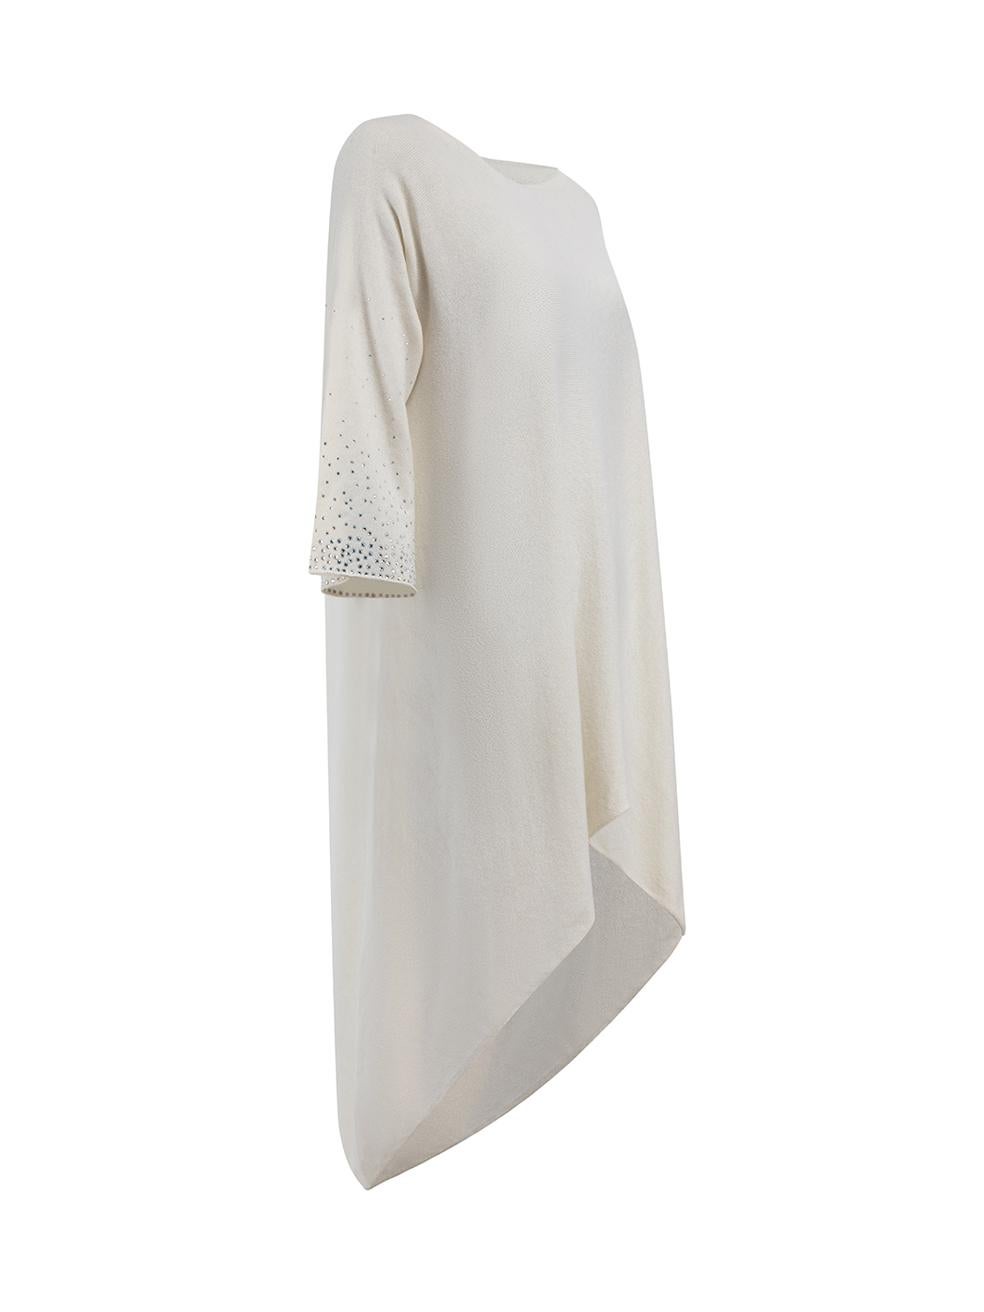 Harrods Women's Cream Knit Jumper with Embellished Sleeves 1